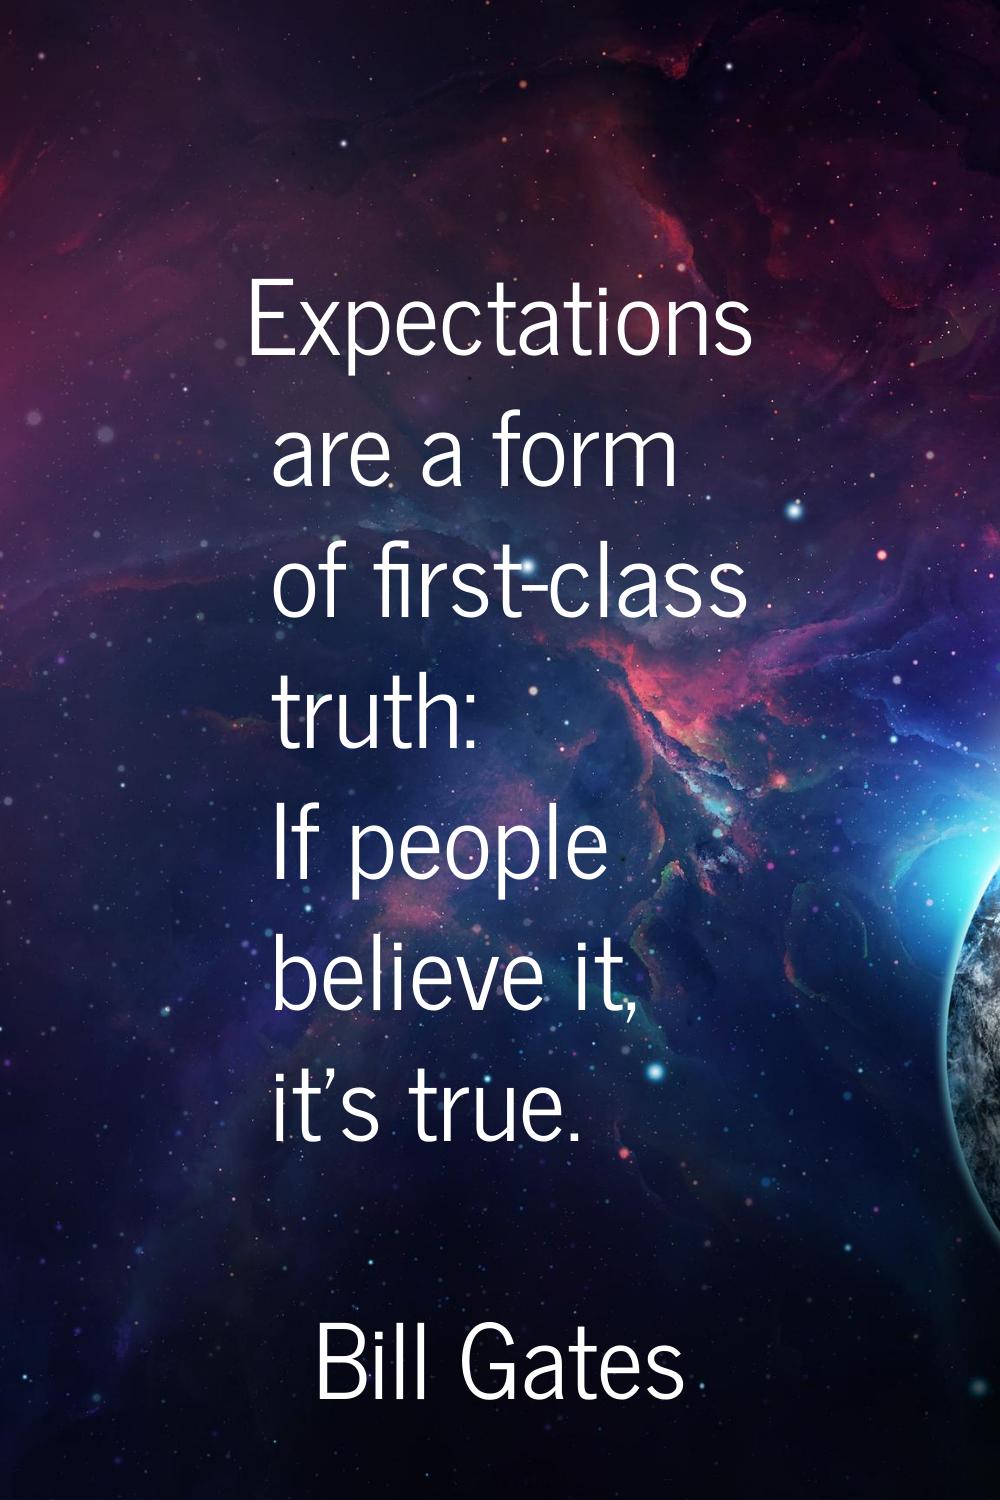 Expectations are a form of first-class truth: If people believe it, it's true.